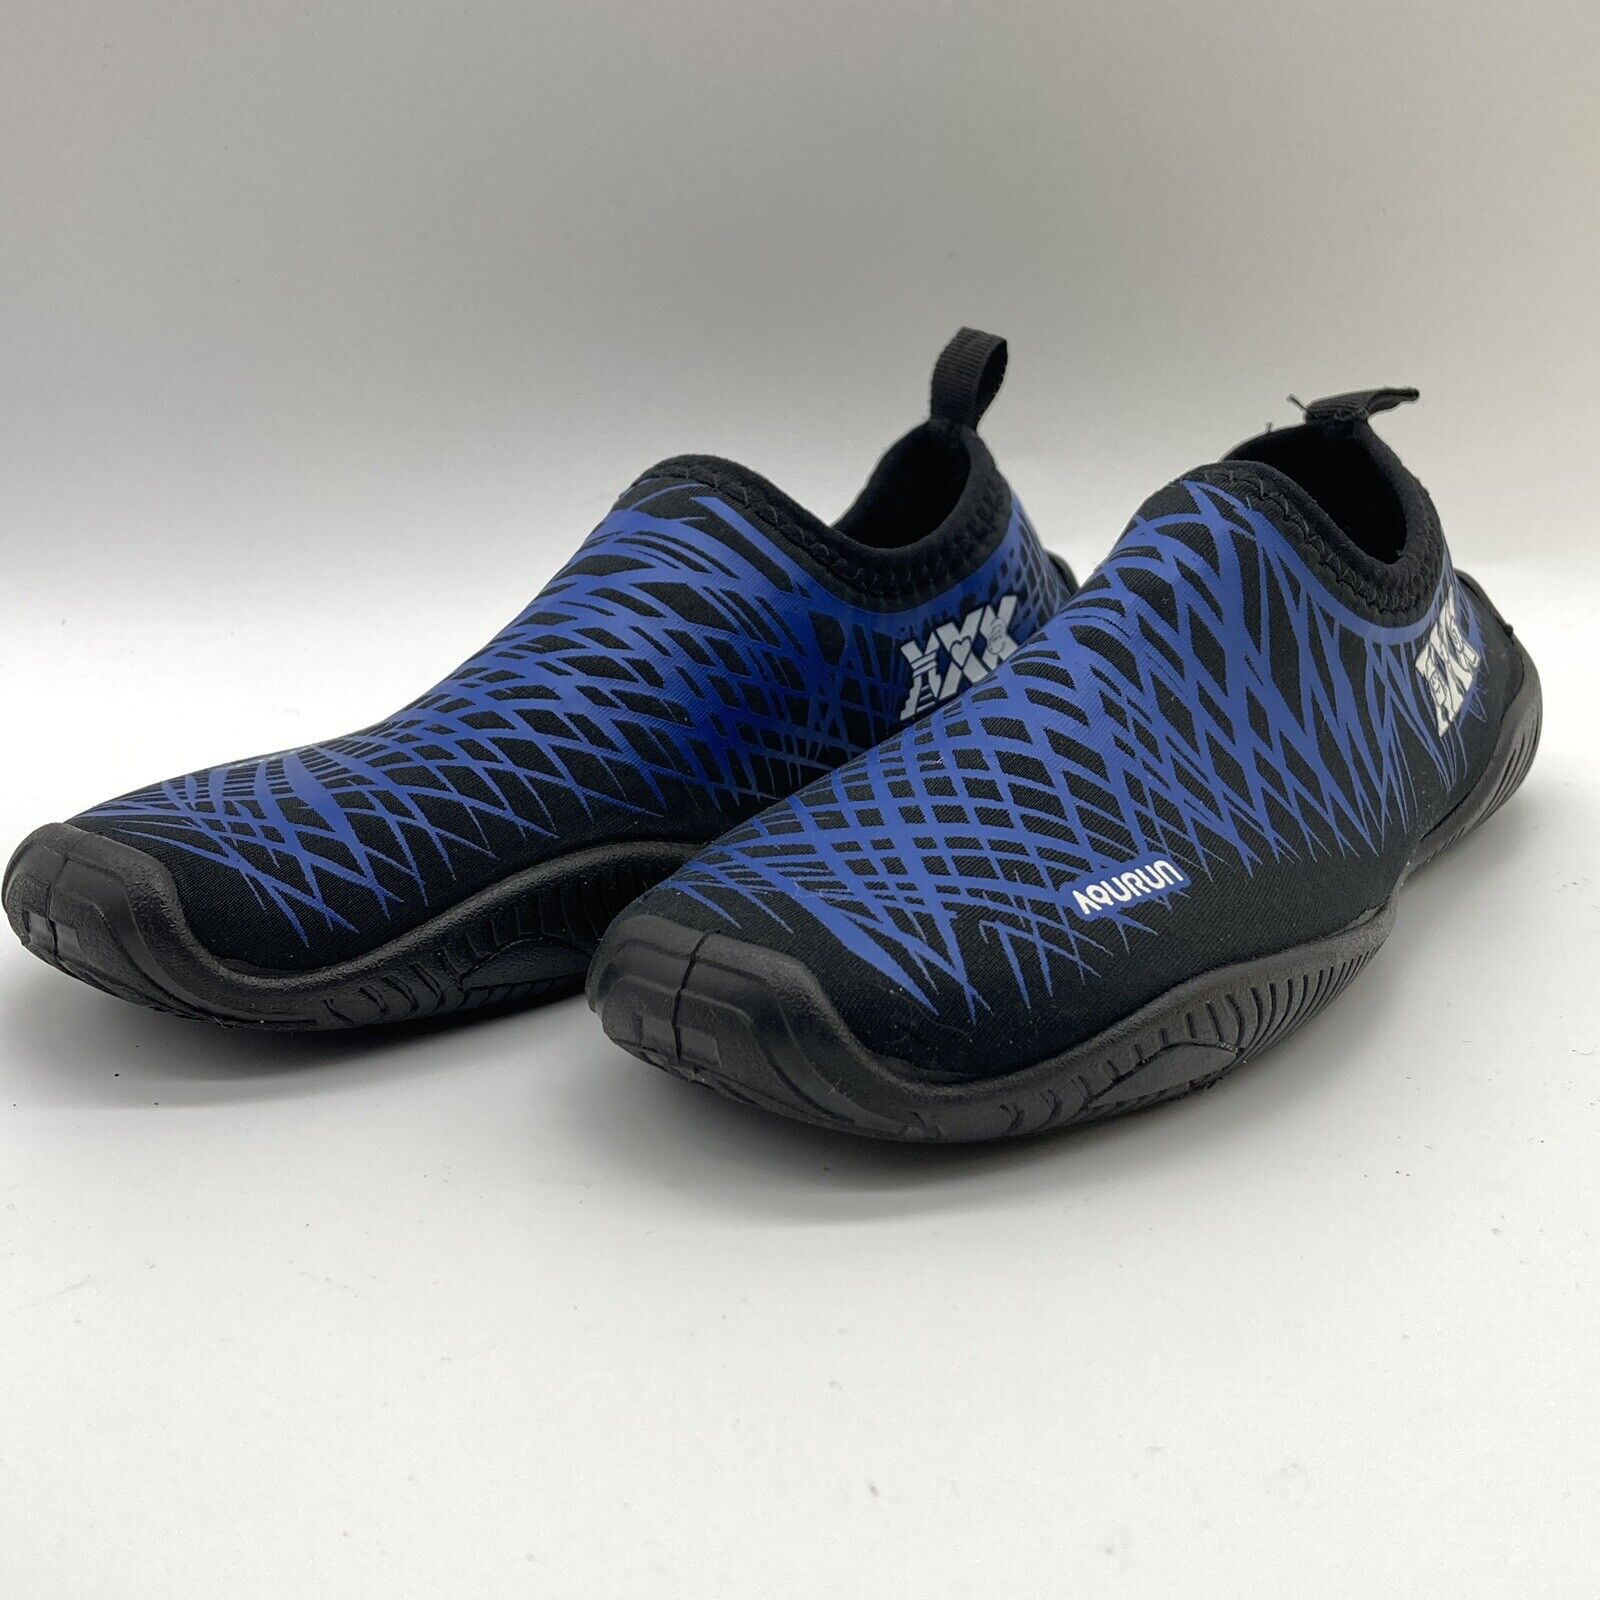 Aqurun Dicapac Water Shoes Quick Dry Anti-slip Black & Blue Youth Size 3.5 Y